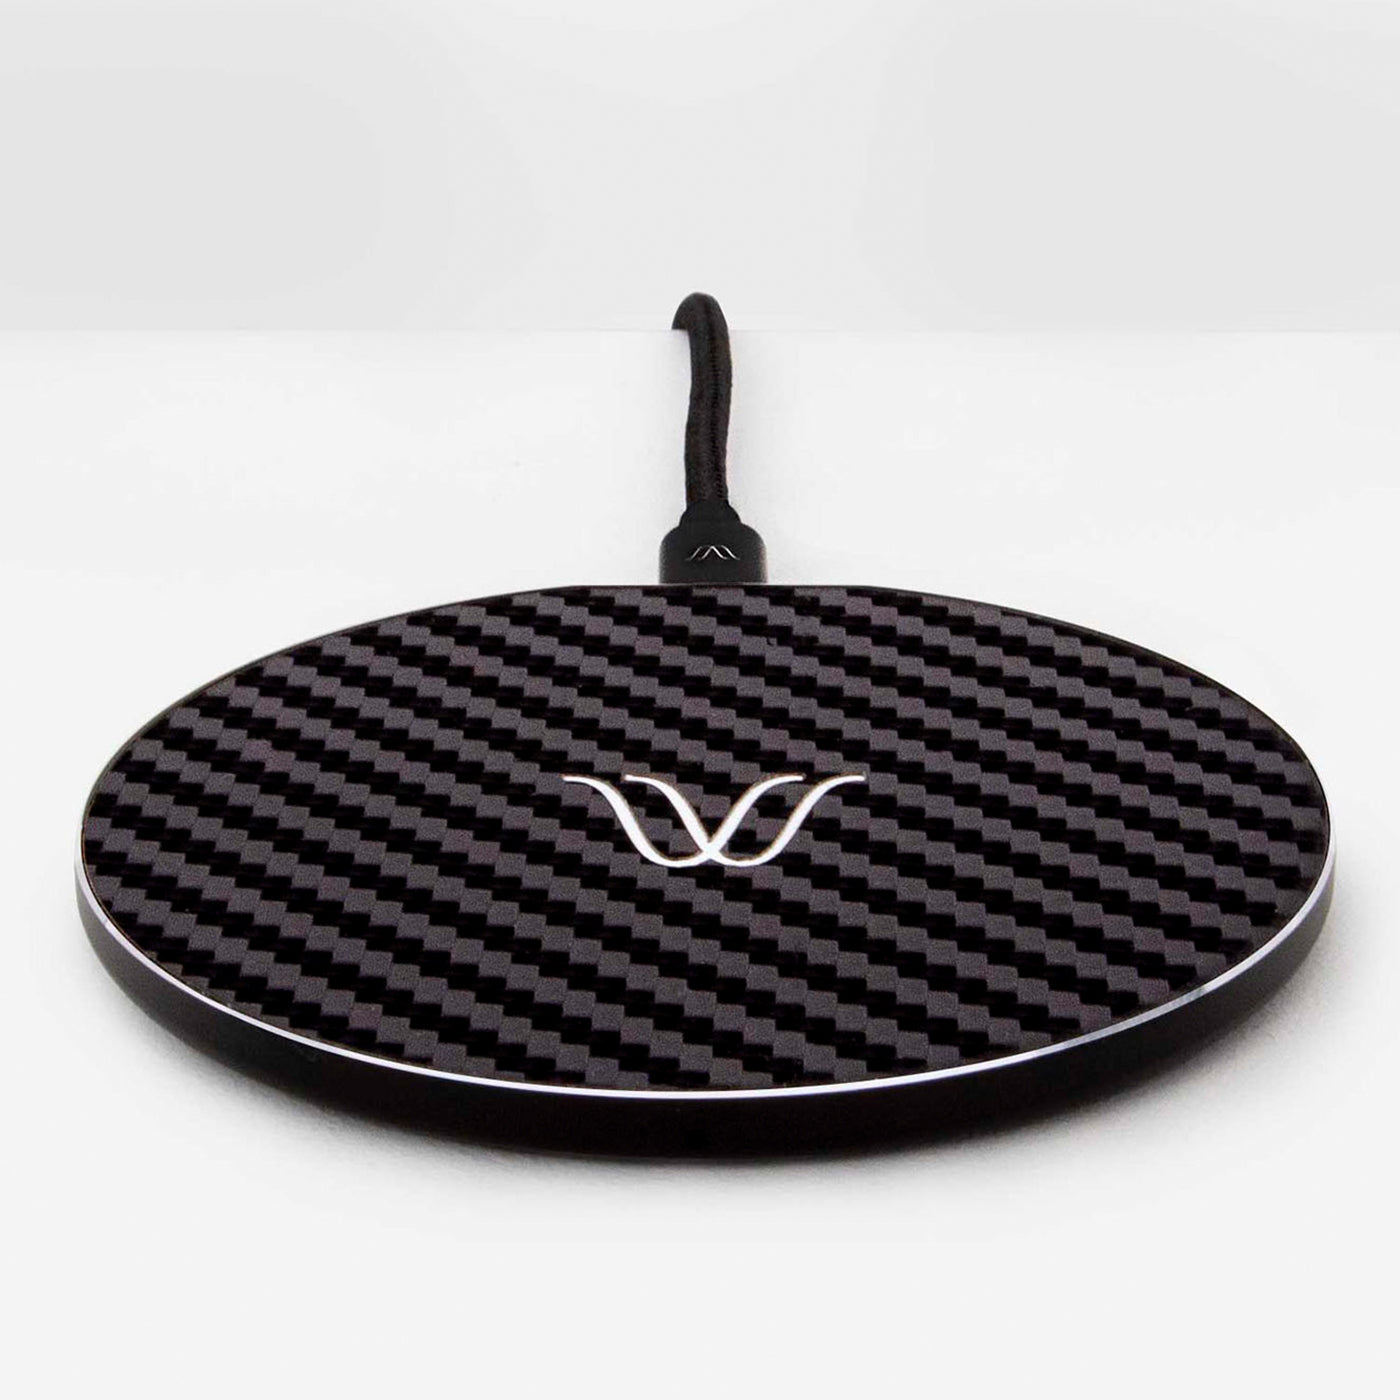 CARBON BLACK Solo Wireless Charger - Vue alternative 1